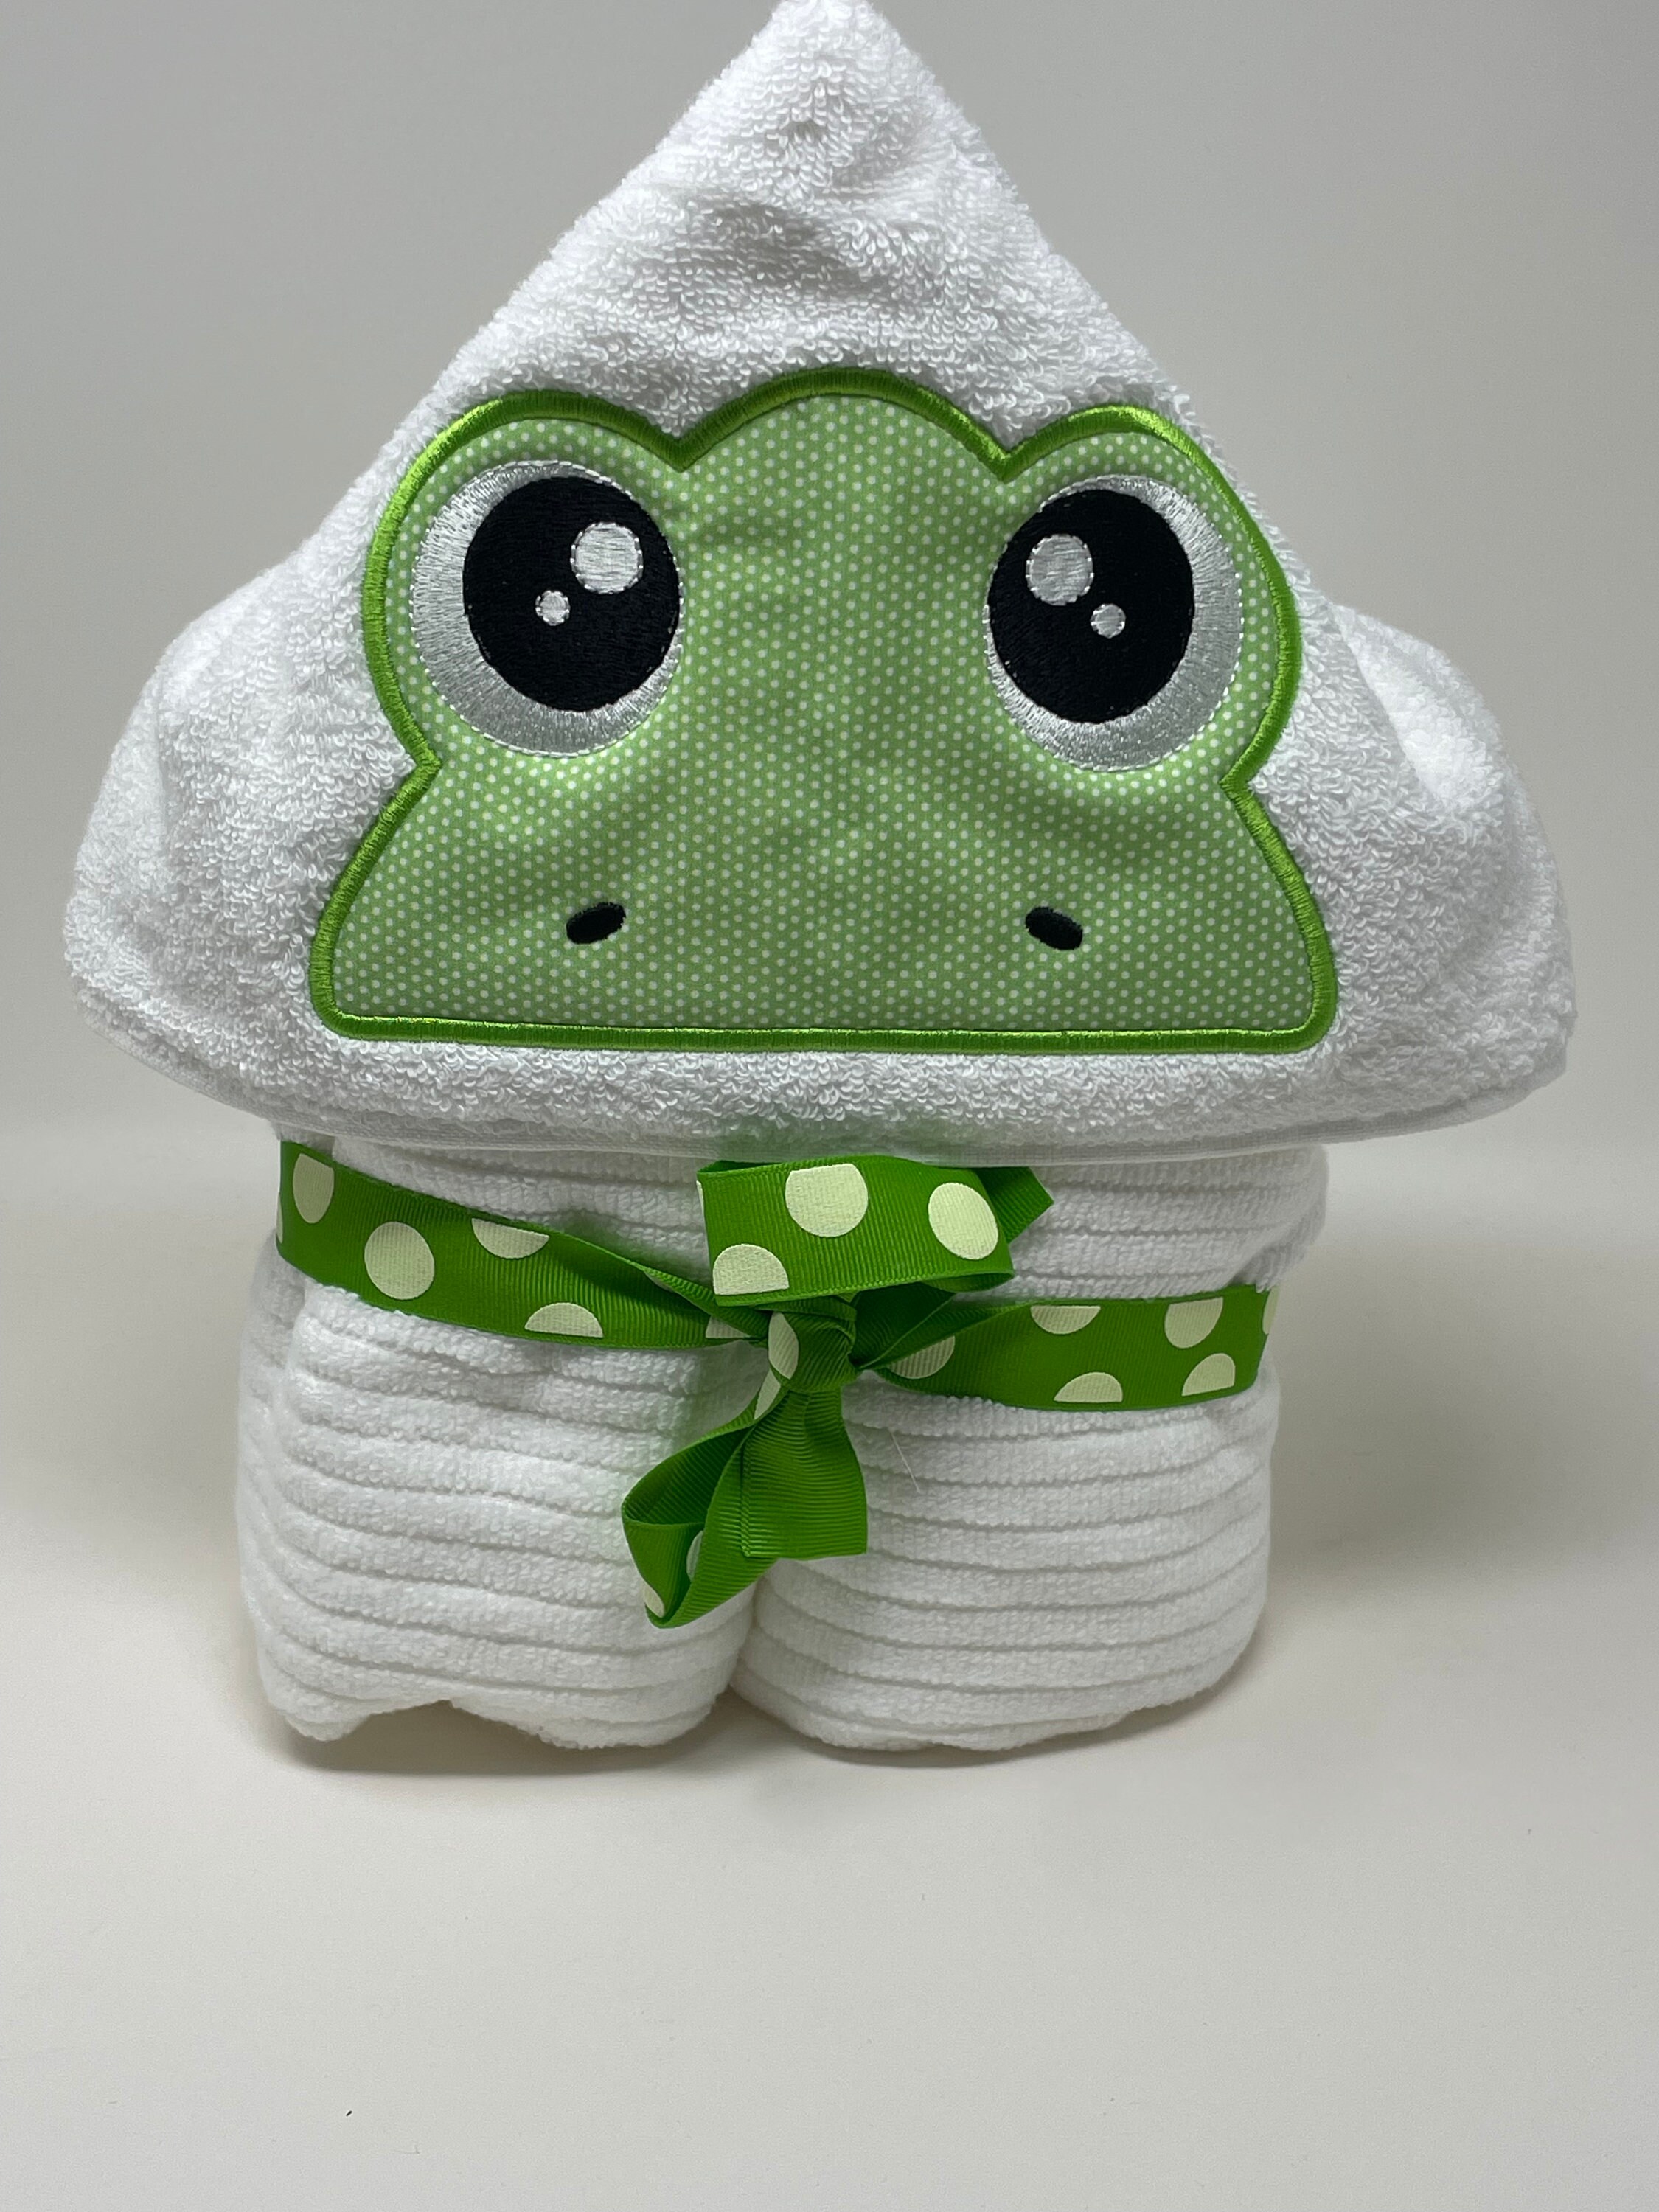 Hooded Towel Frog Bath Towels for Children and Adults – Knotty Kid